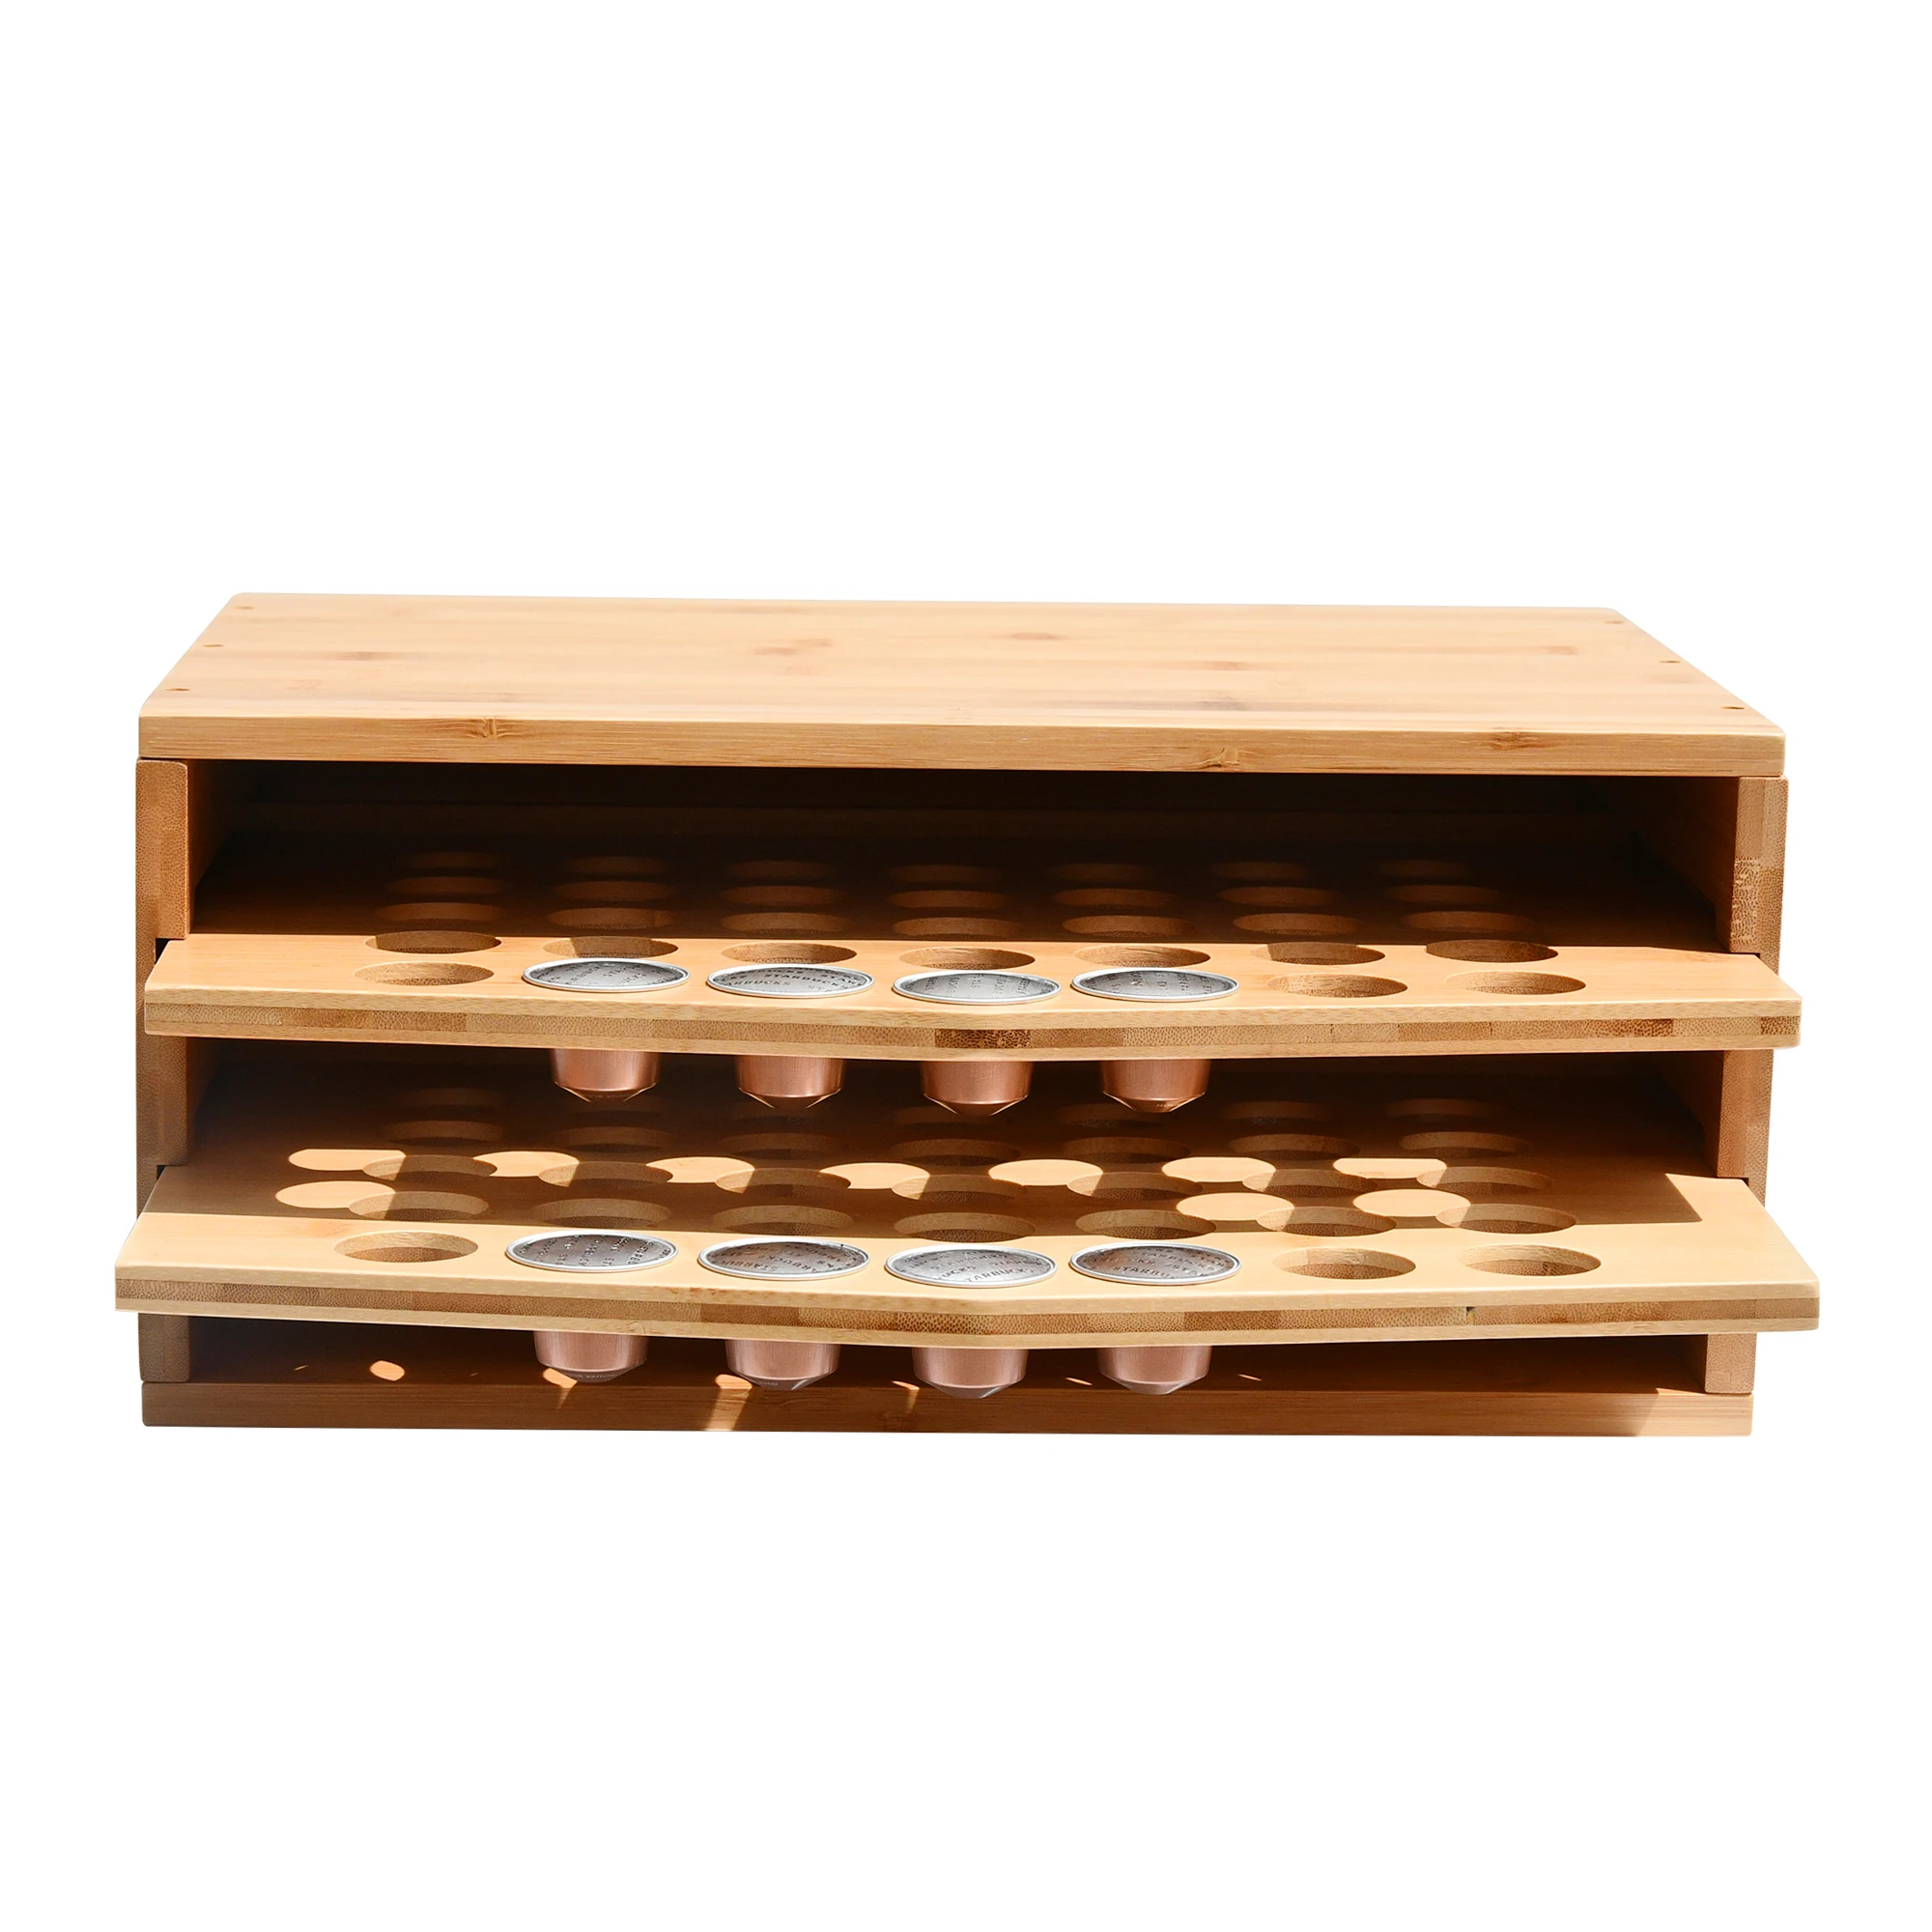 Bamboo Coffee Pods Holder Capsules Storage Drawer Compatible With Keurig K-Cup Pods 2-tier for Kitchen Office Bar